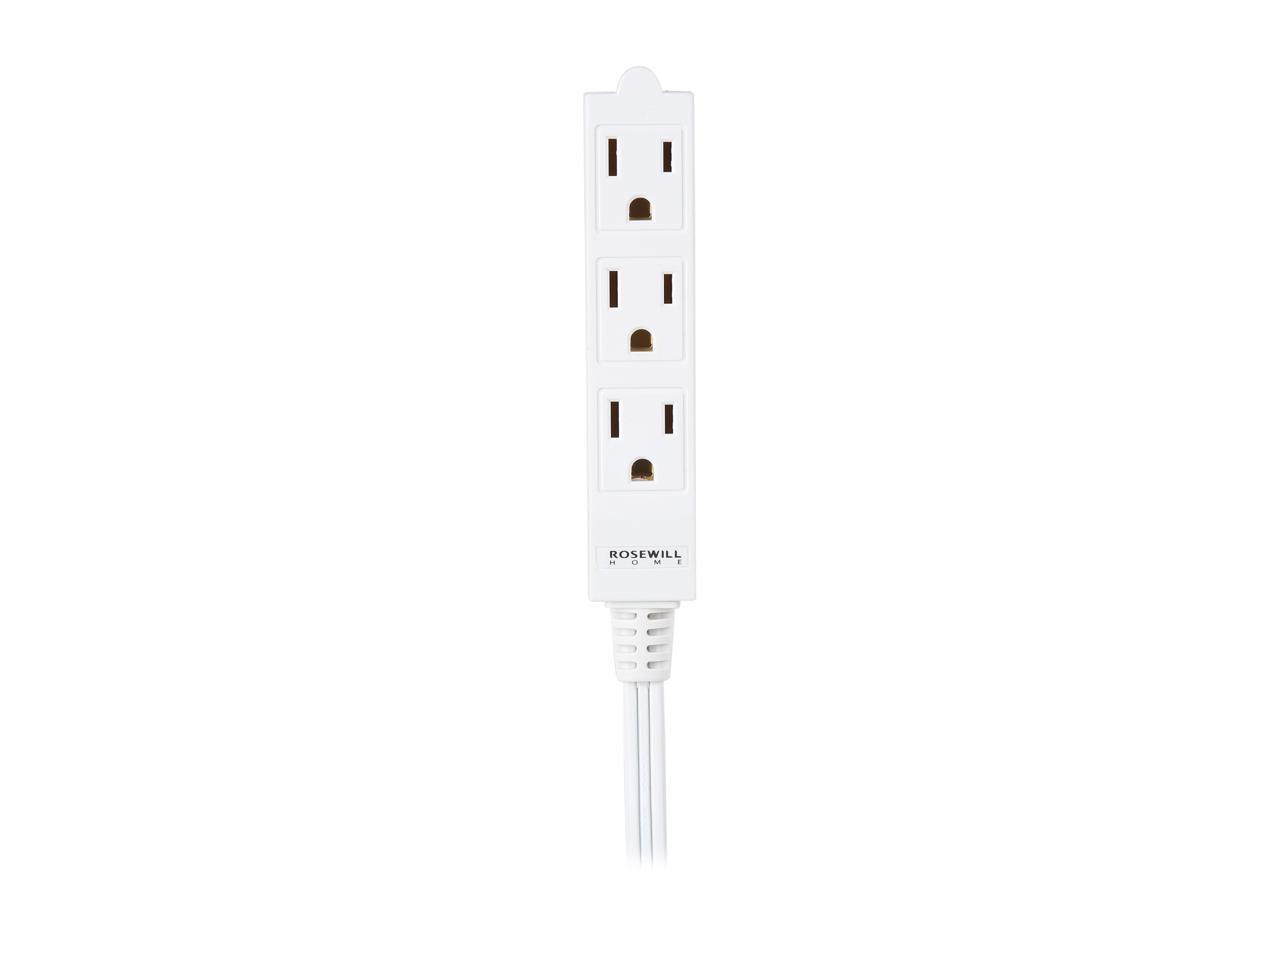 Rosewill 3-Outlet 6-Foot Power Strip 2-Pack RHSP-17003 - White